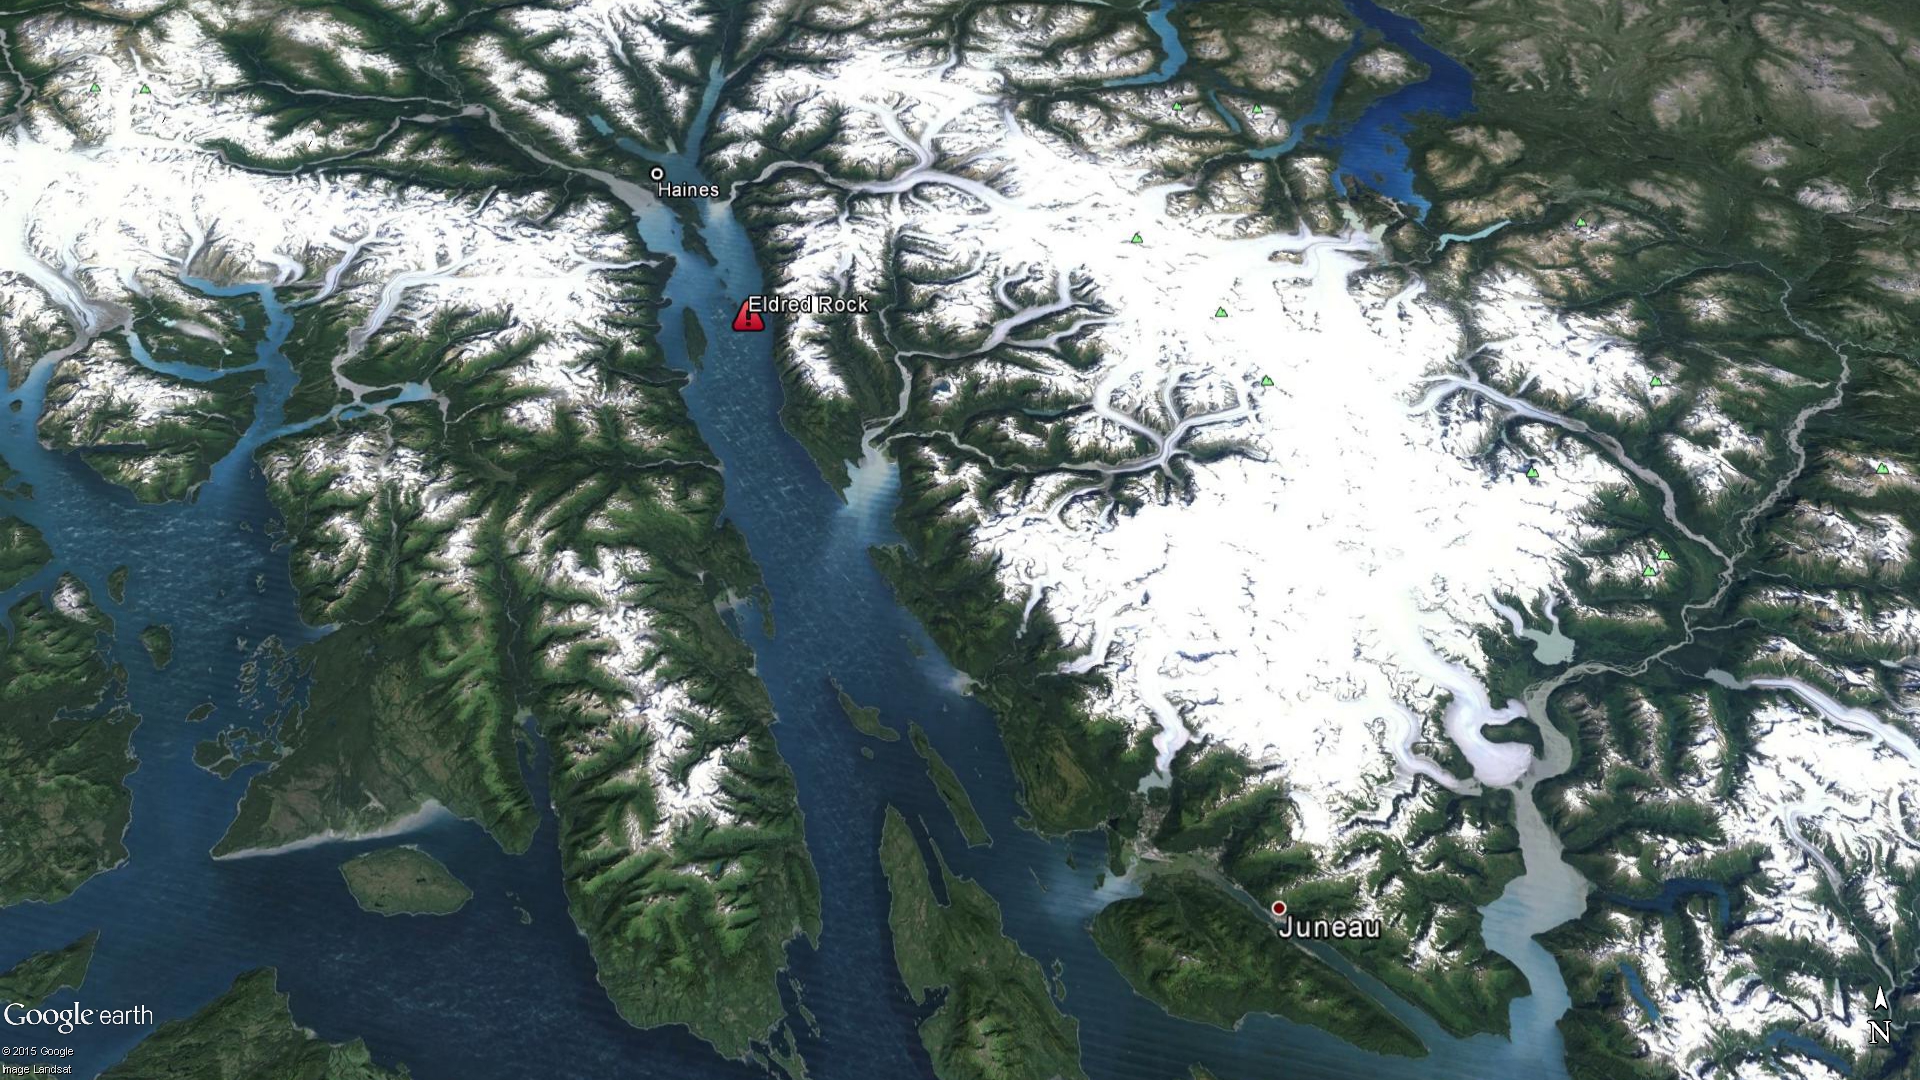 Eldred Rock is south of Haines. (Google Maps)